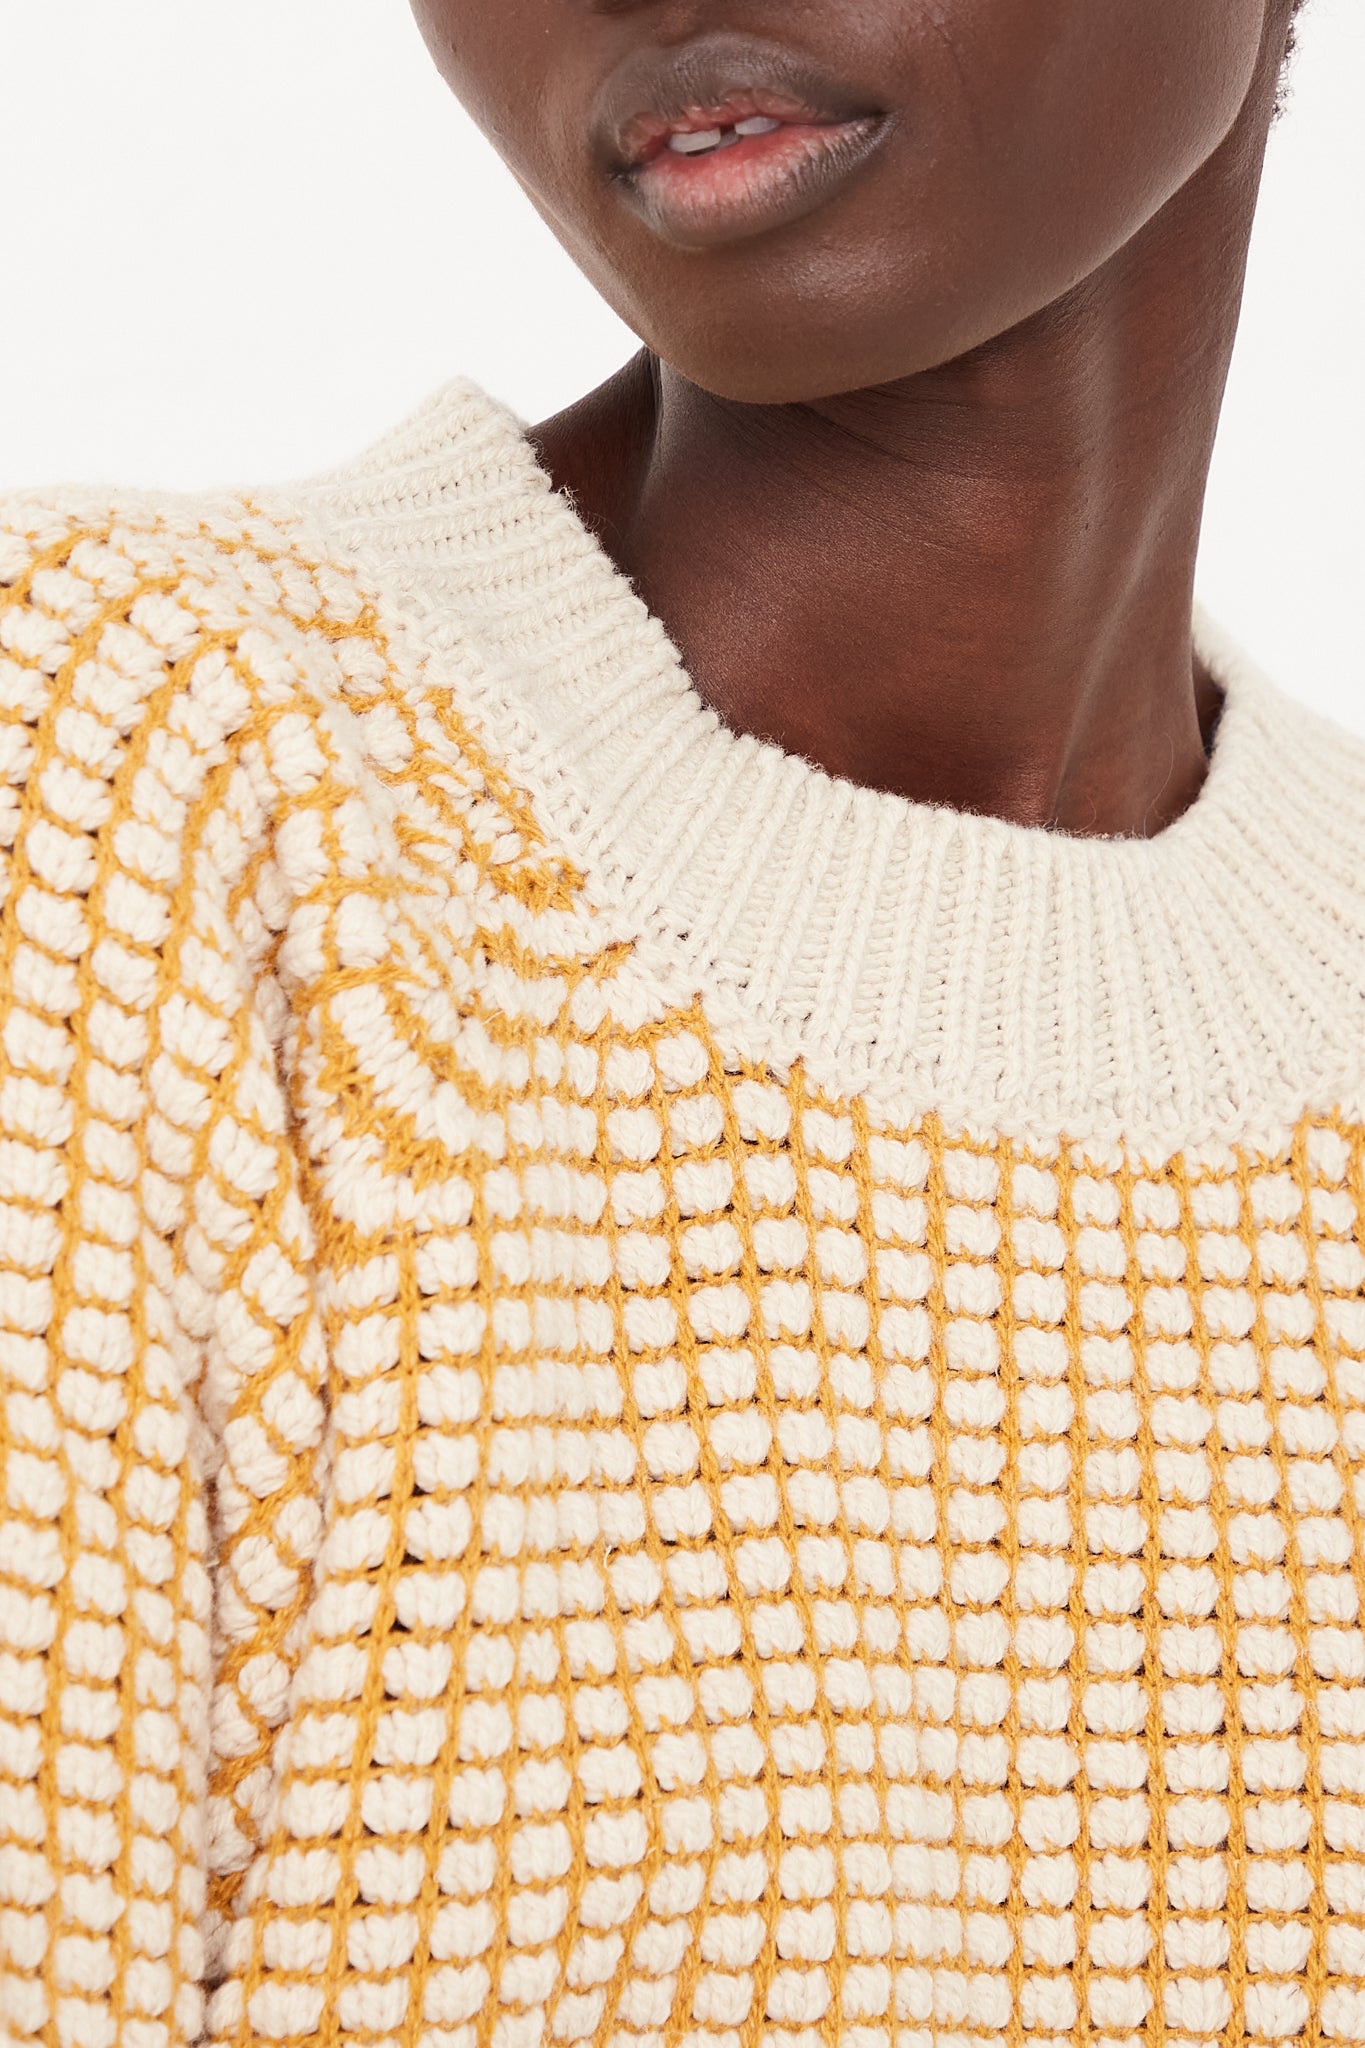 An oversized Crewneck Sweater in a yellow and white two-tone knit design, by Jan-Jan Van Essche.